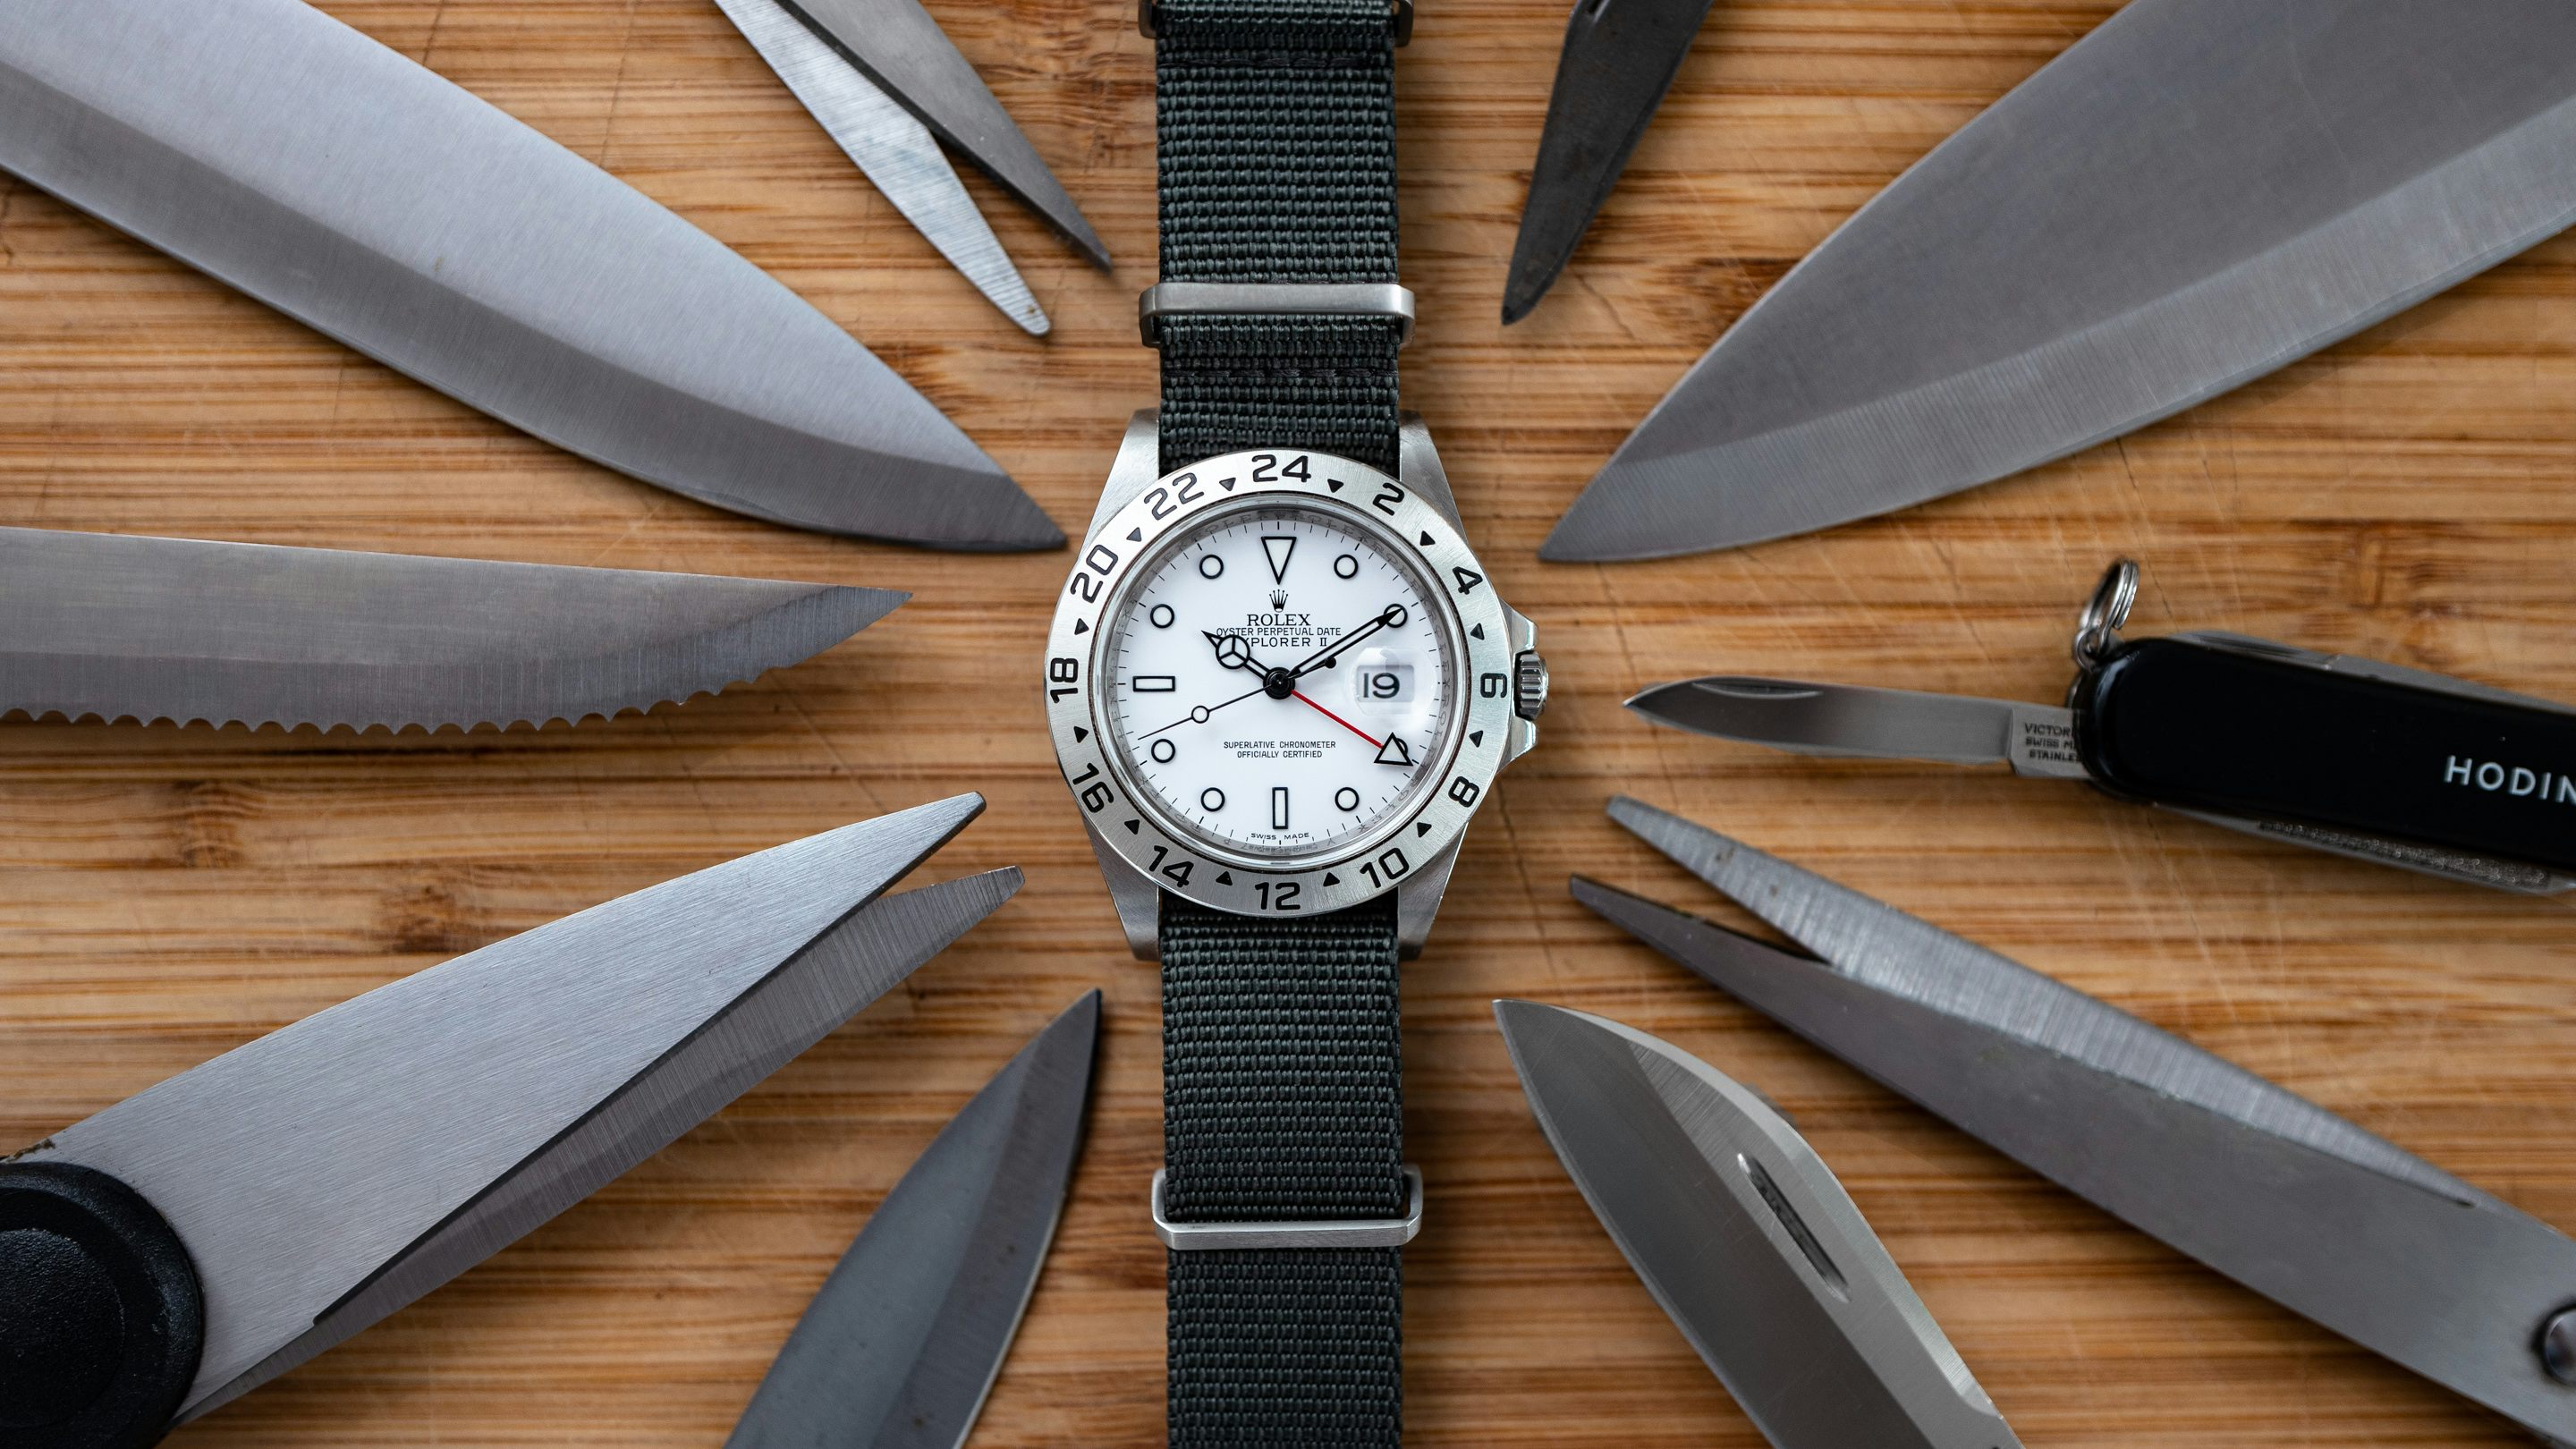 The Best Watch Straps From Steal and Leather to Perlon and Nato - InsideHook